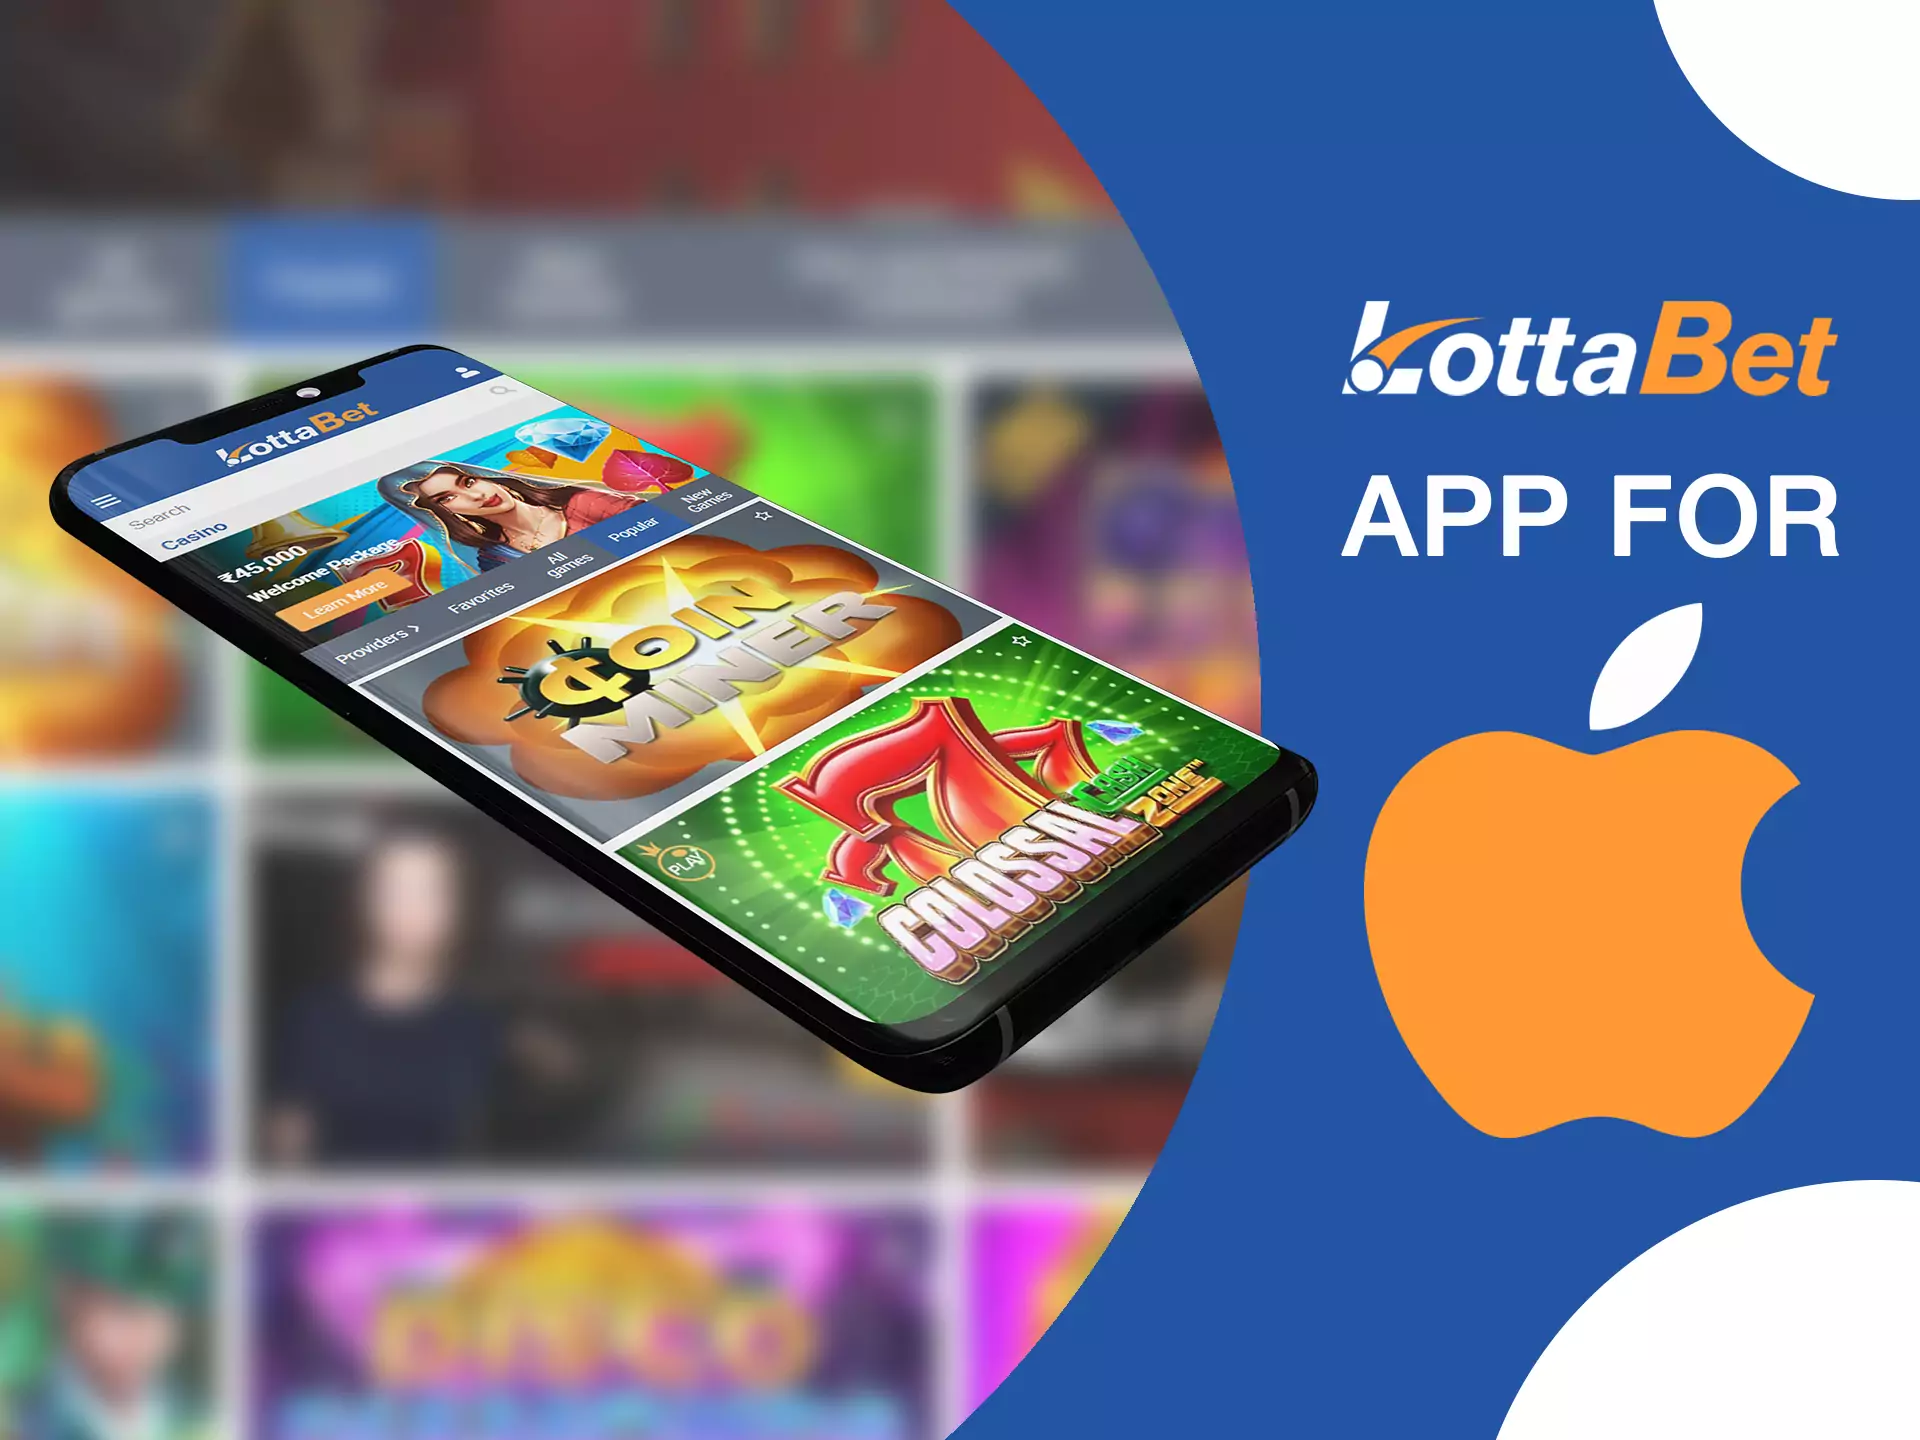 iOS devices supports LottaBet app.